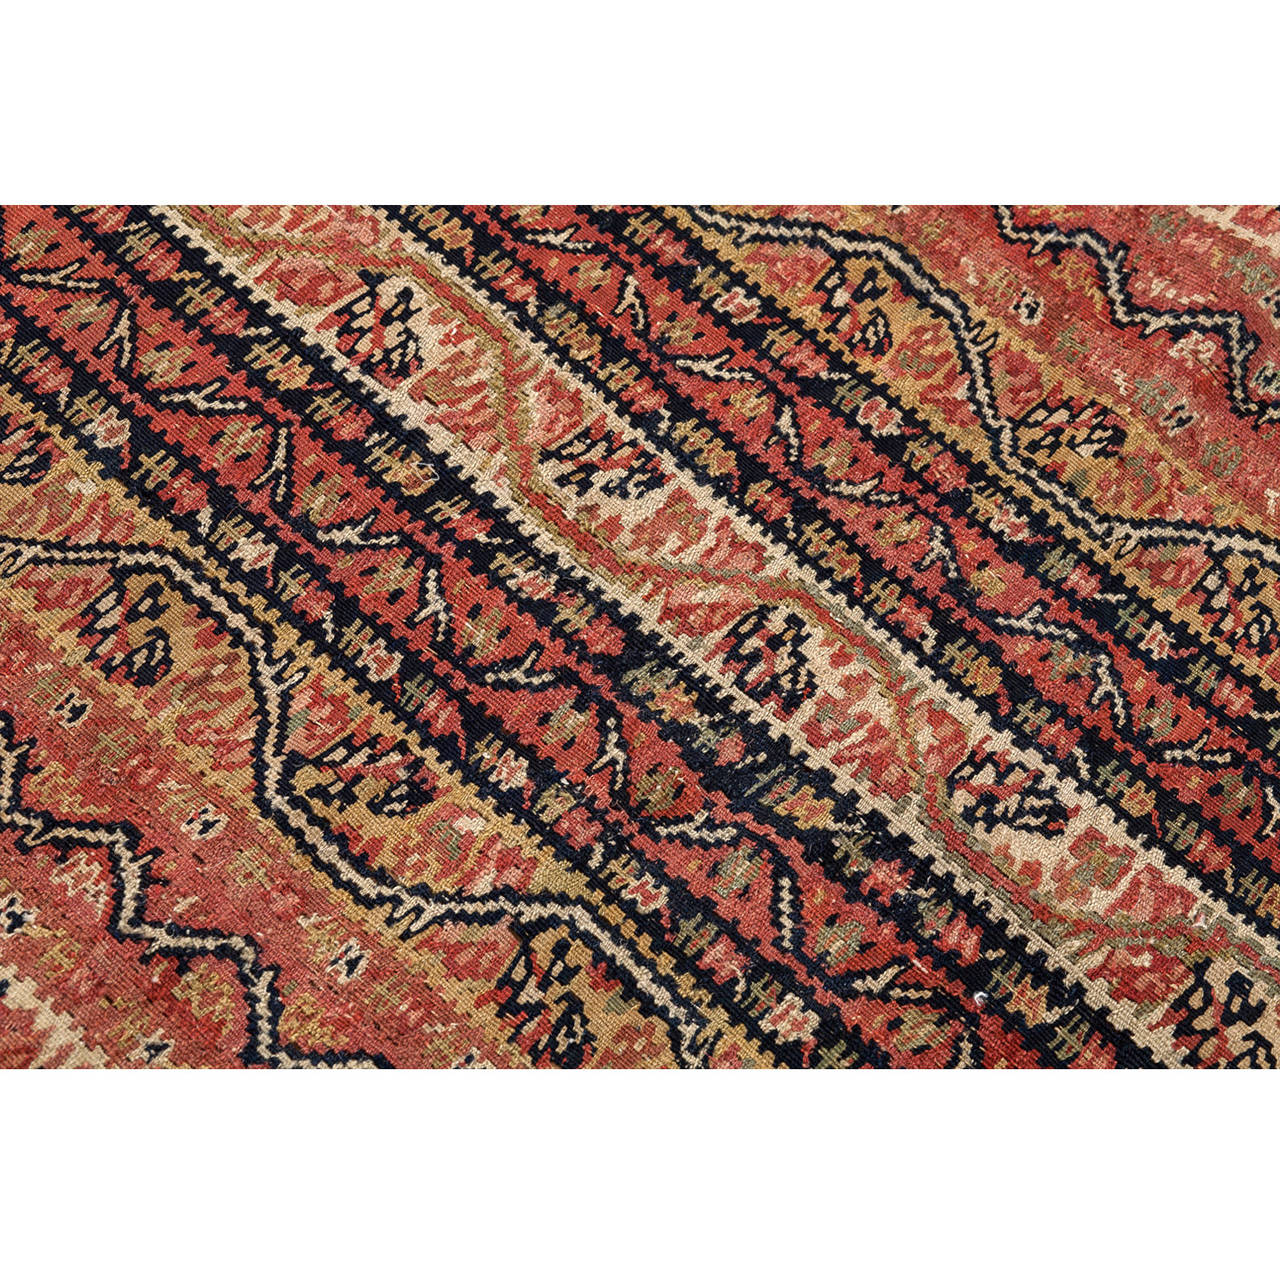 Senneh kilims represent a unique type of Persian slit-tapestry in that they are not only very fine and pliable, but they also reproduce the delicate wrought detail of Senneh pile rugs.

The present kilim is an antique piece, dated c. 1870. It has